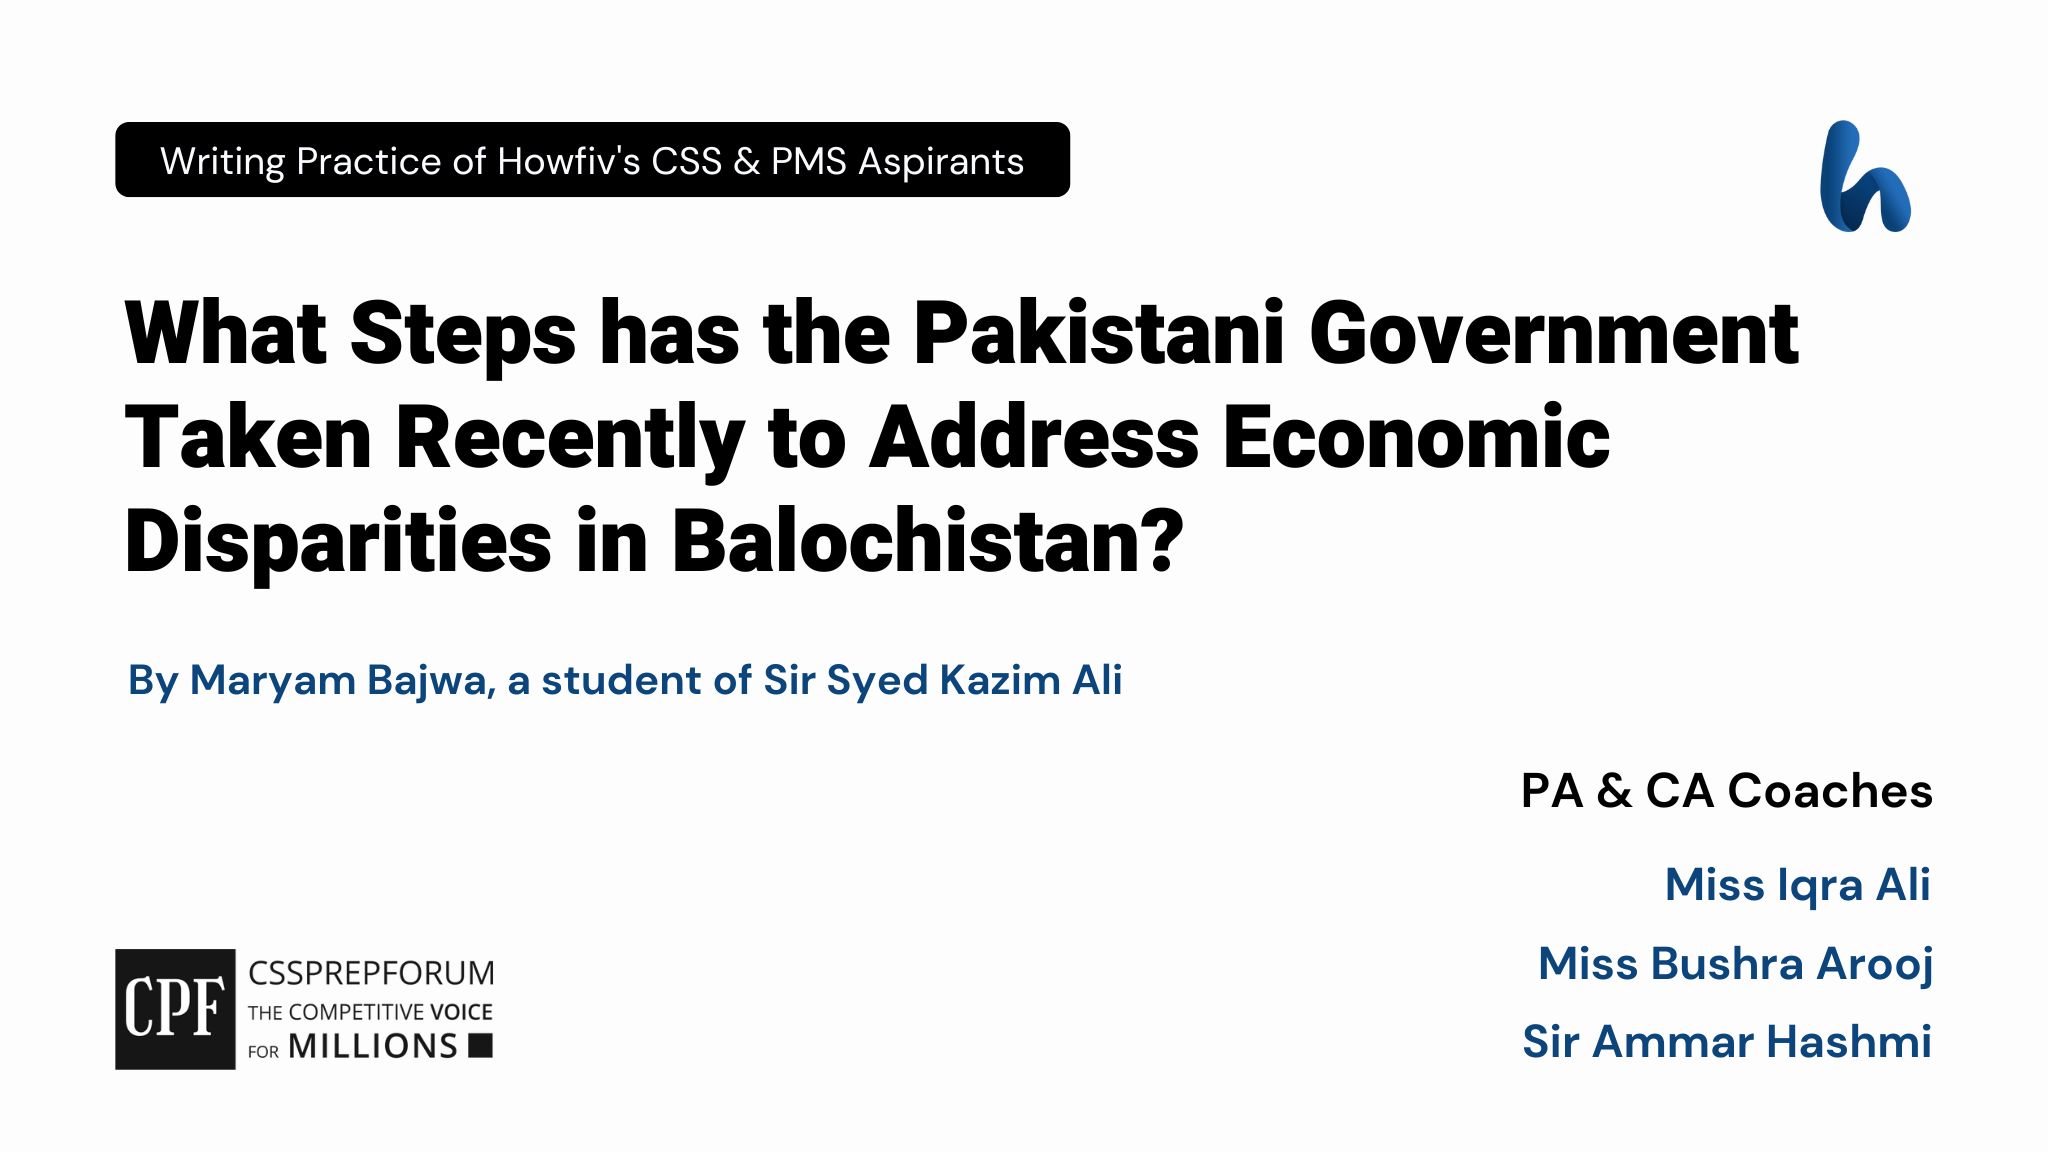 CSS Current Affairs article | Steps Taken to Address Economic Disparities in Balochistan | is written by Maryam Bajwa under the supervision of Sir Ammar Hashmi...